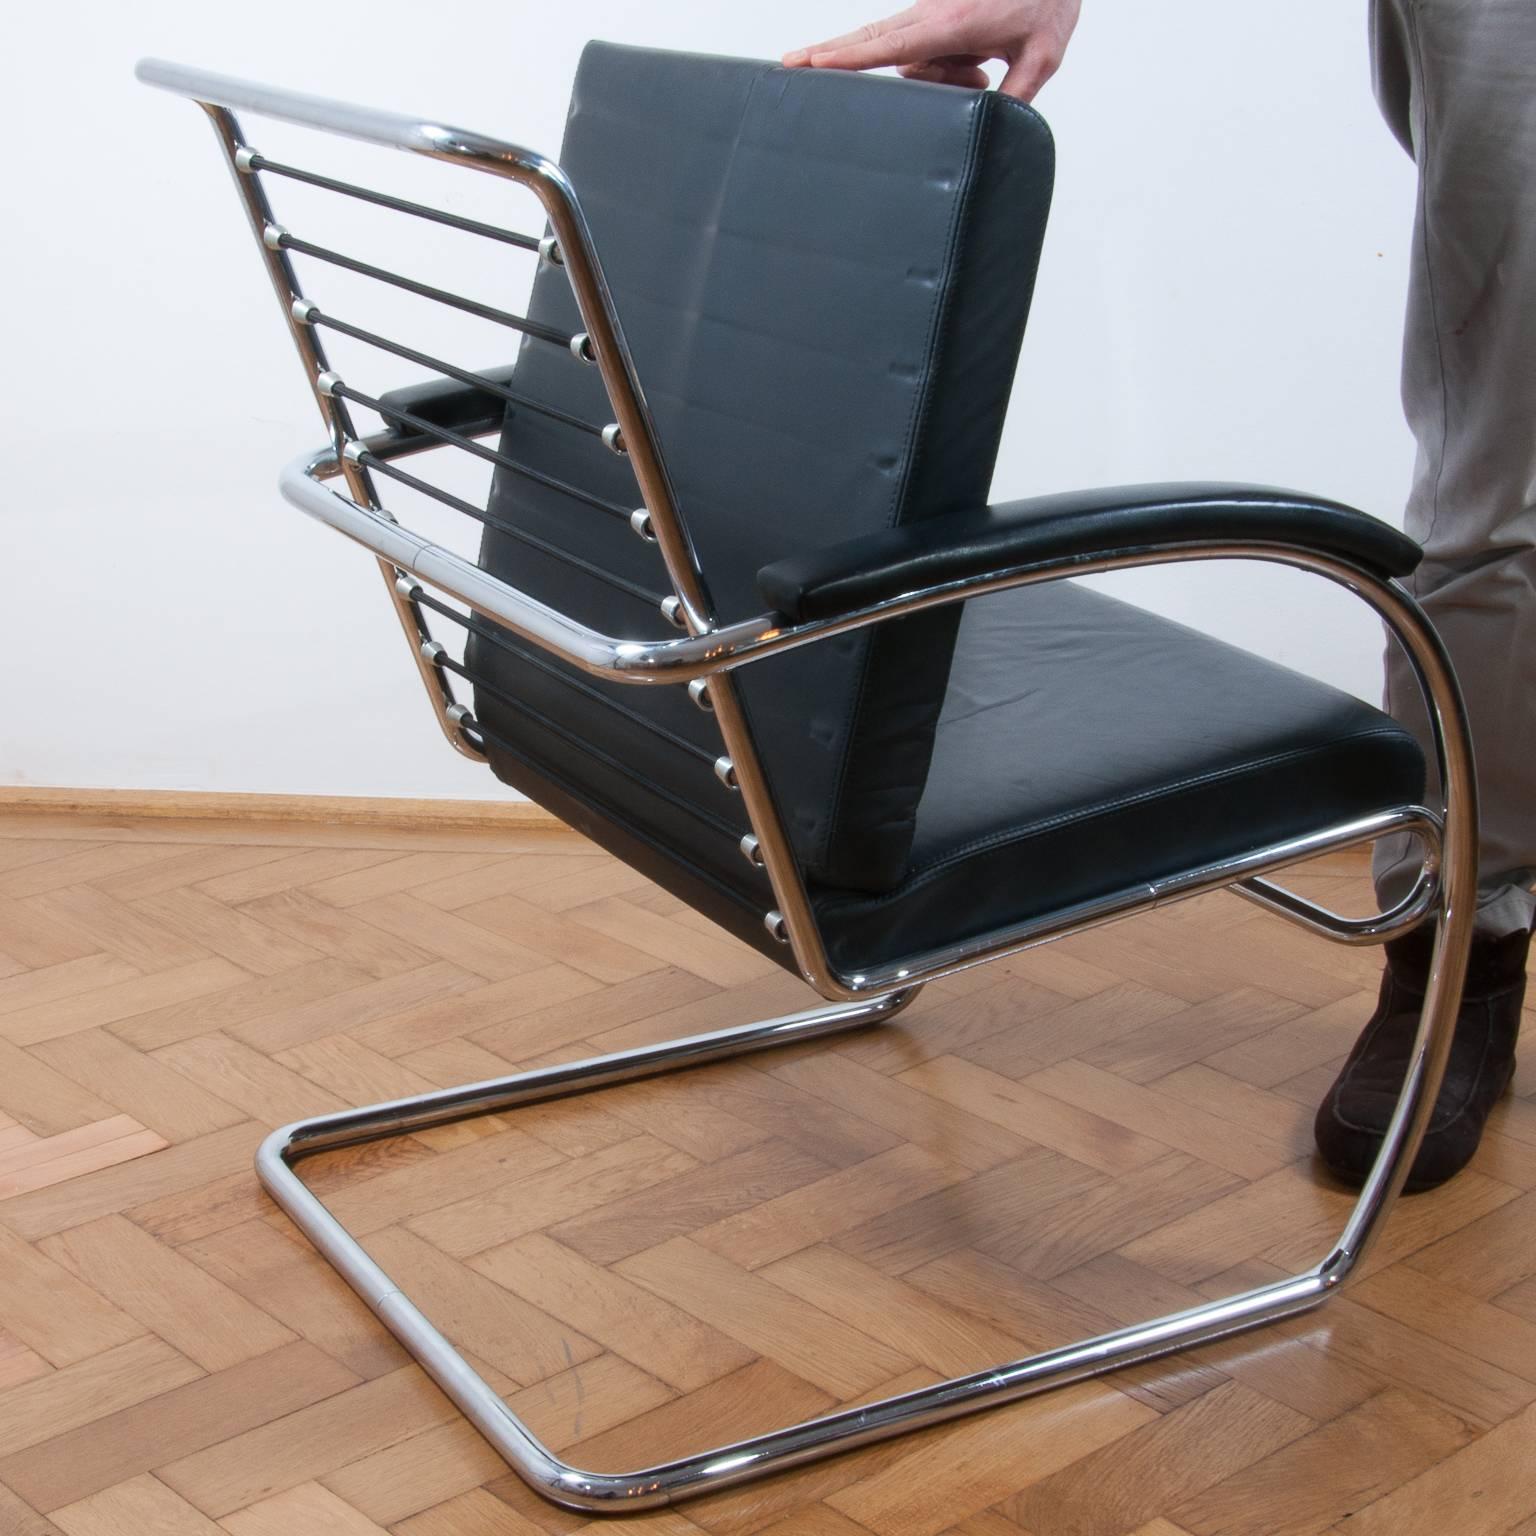 Thonet K147 Cantilever Lounge Chair Bauhaus Classic Designed, Anton Lorenz, 1930 In Excellent Condition For Sale In Vienna, AT